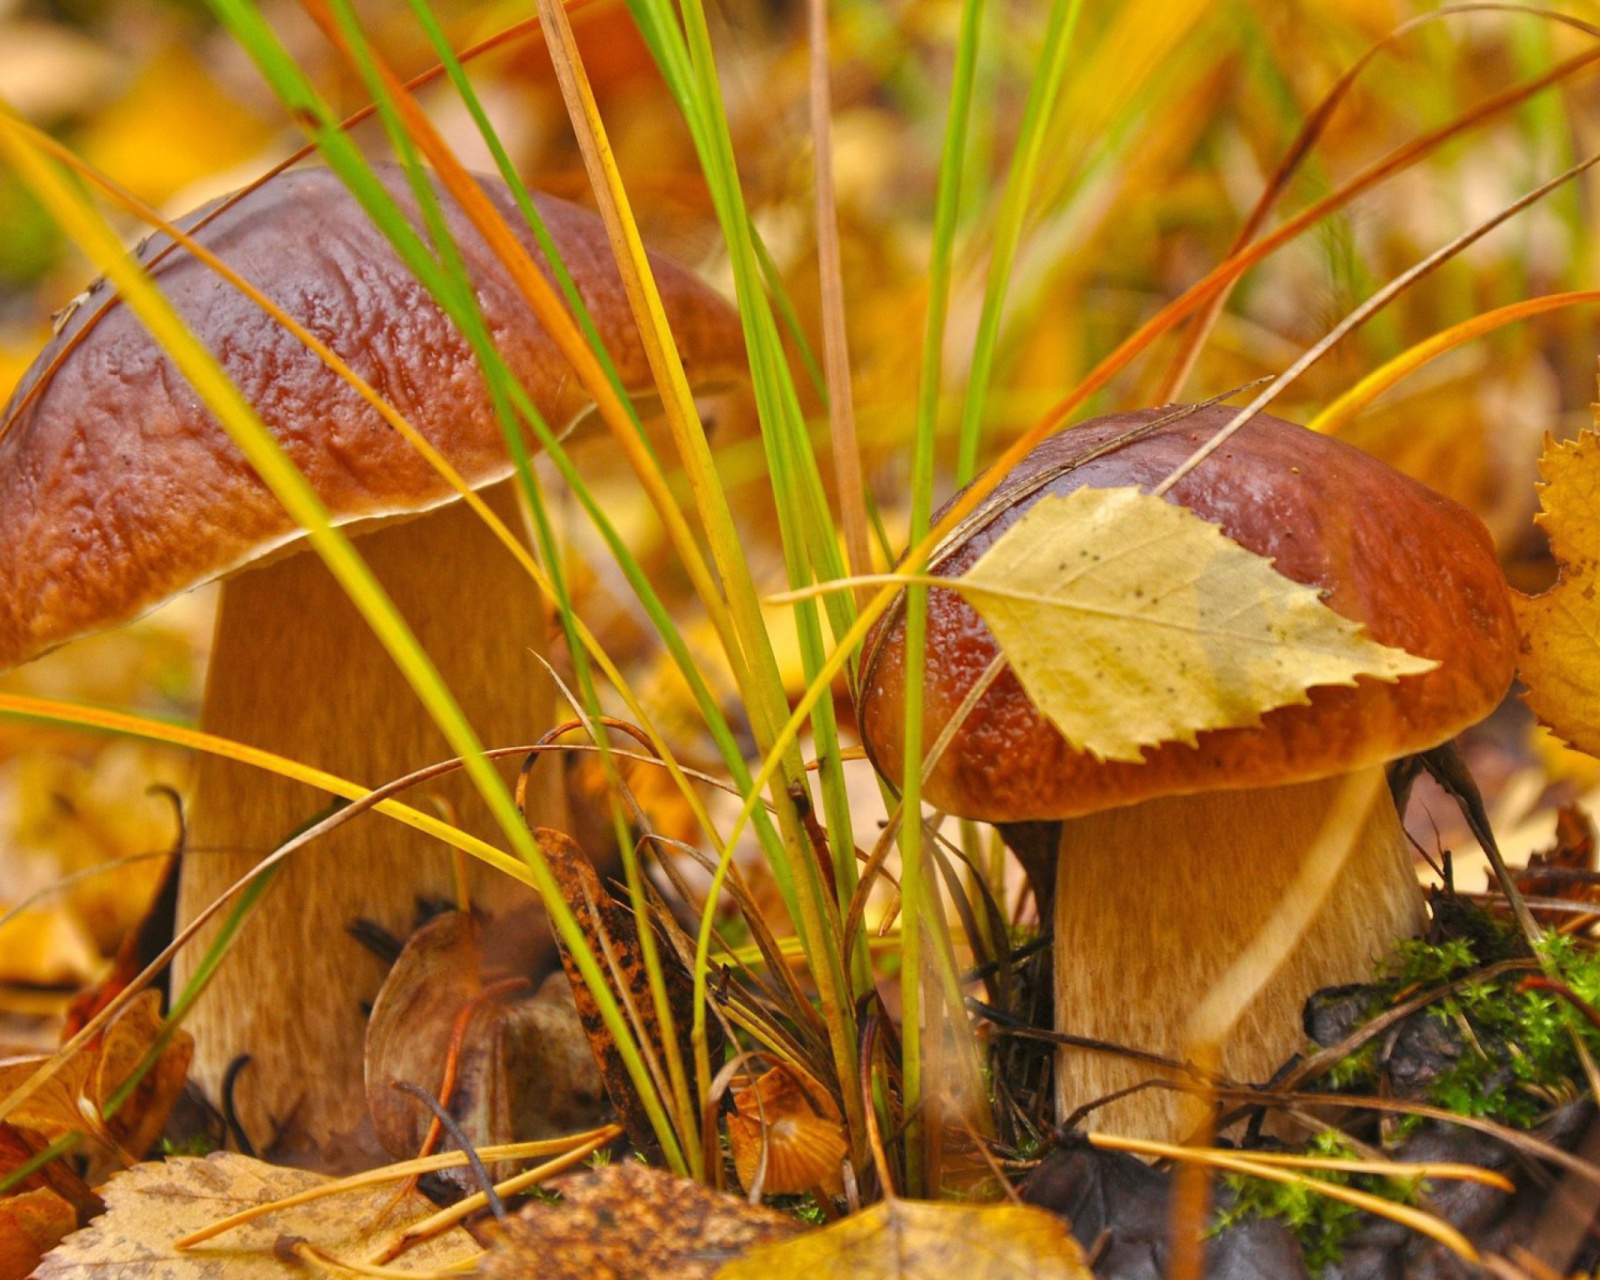 Autumn Mushrooms with Yellow Leaves wallpaper 1600x1280